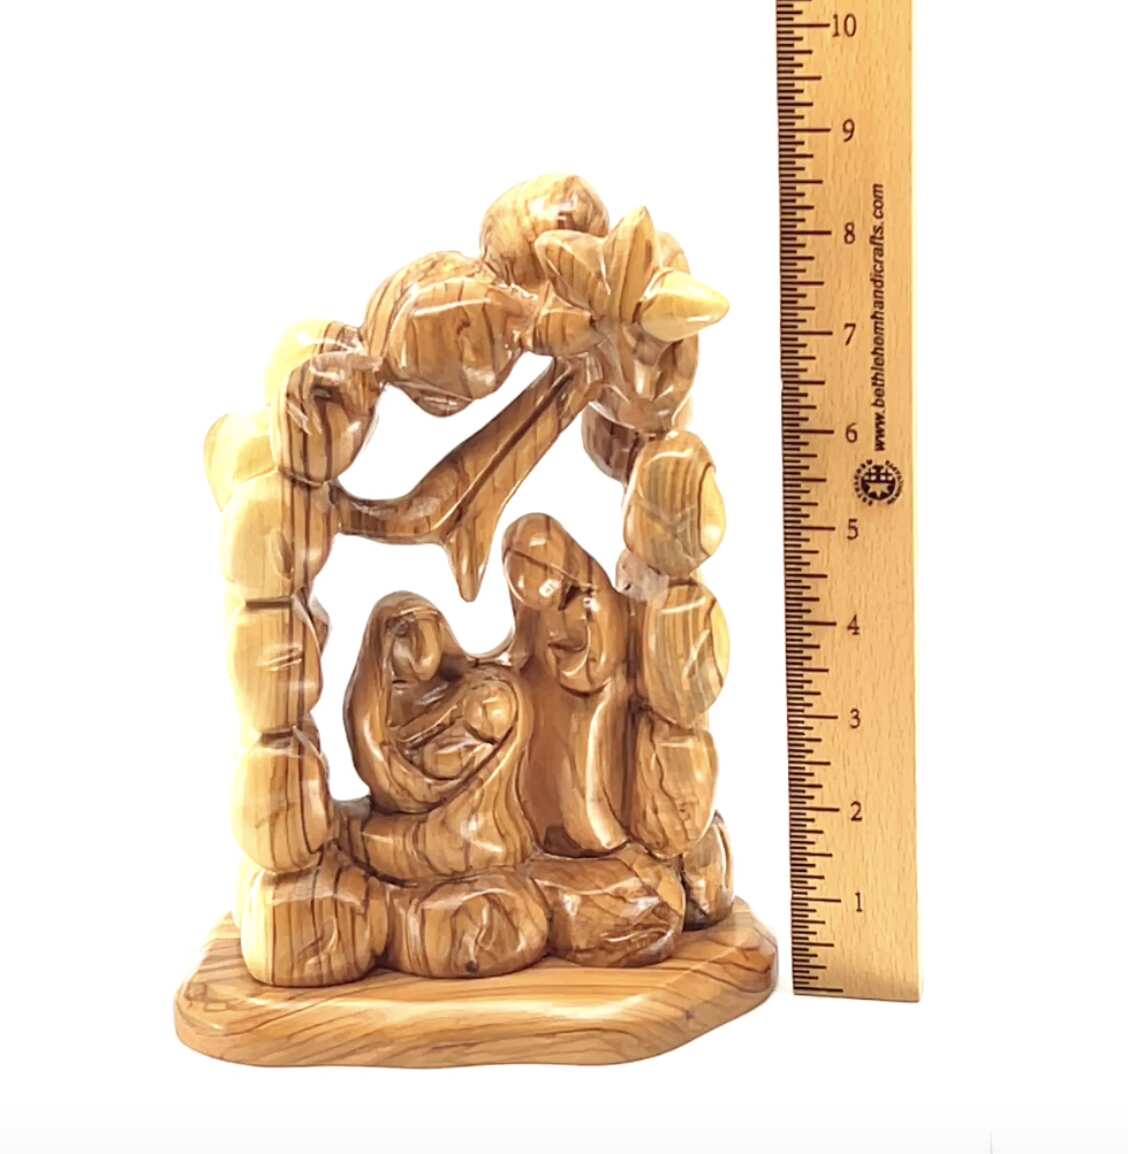 Nativity Scene Sculpture with Bethlehem Star, 8.7" Abstract Hand Carved Olive Wood from Holy Land